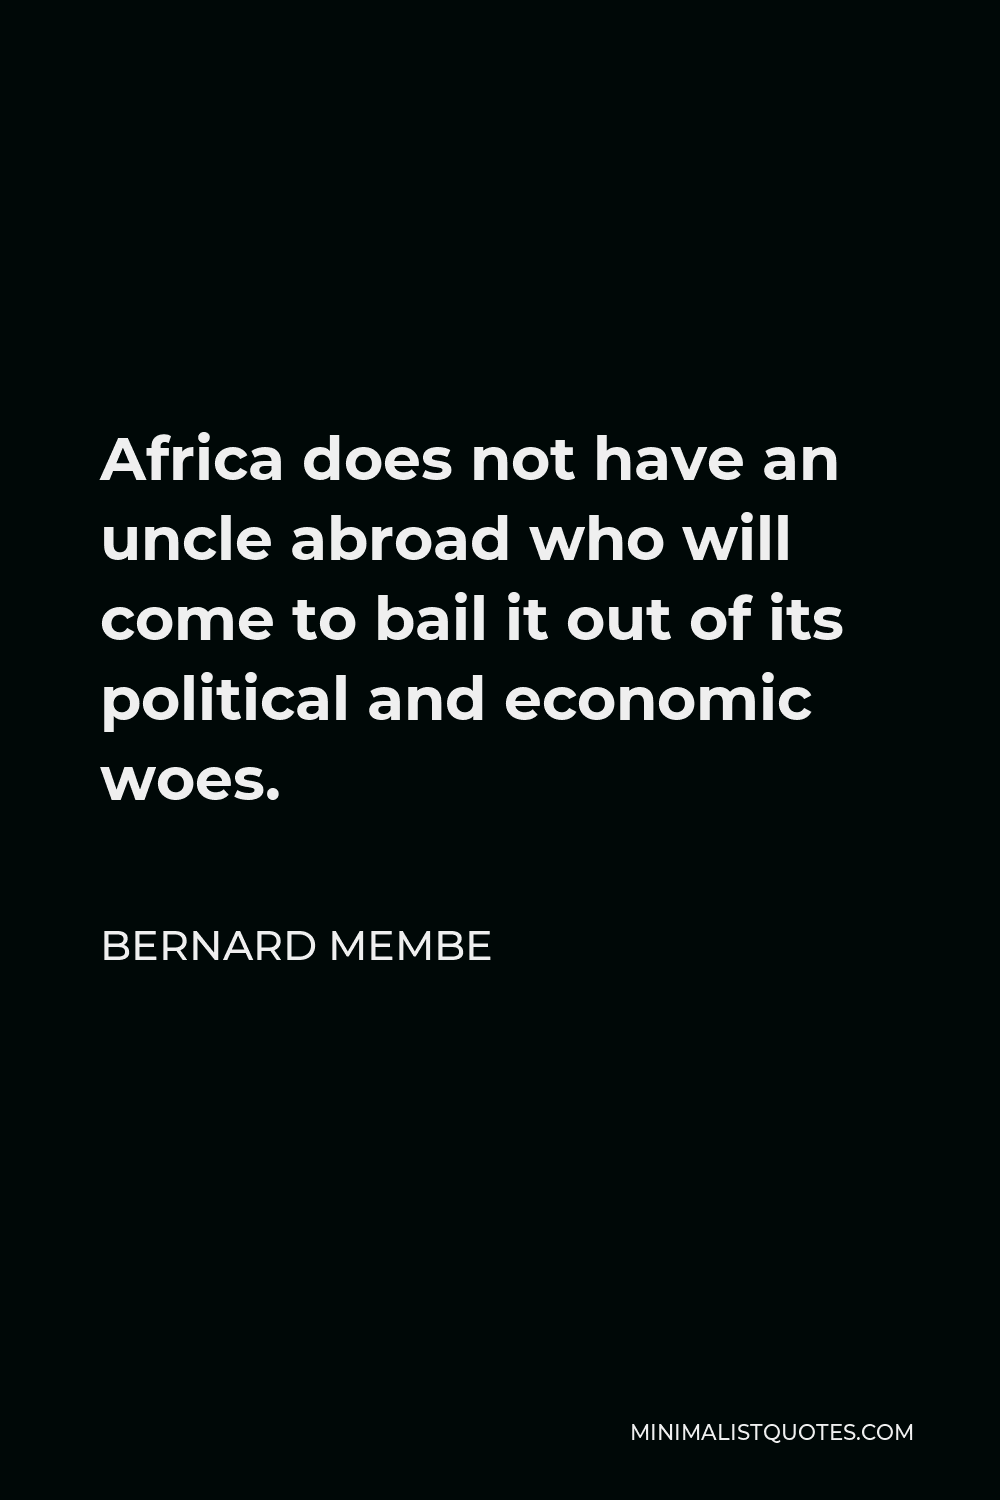 Bernard Membe Quote - Africa does not have an uncle abroad who will come to bail it out of its political and economic woes.